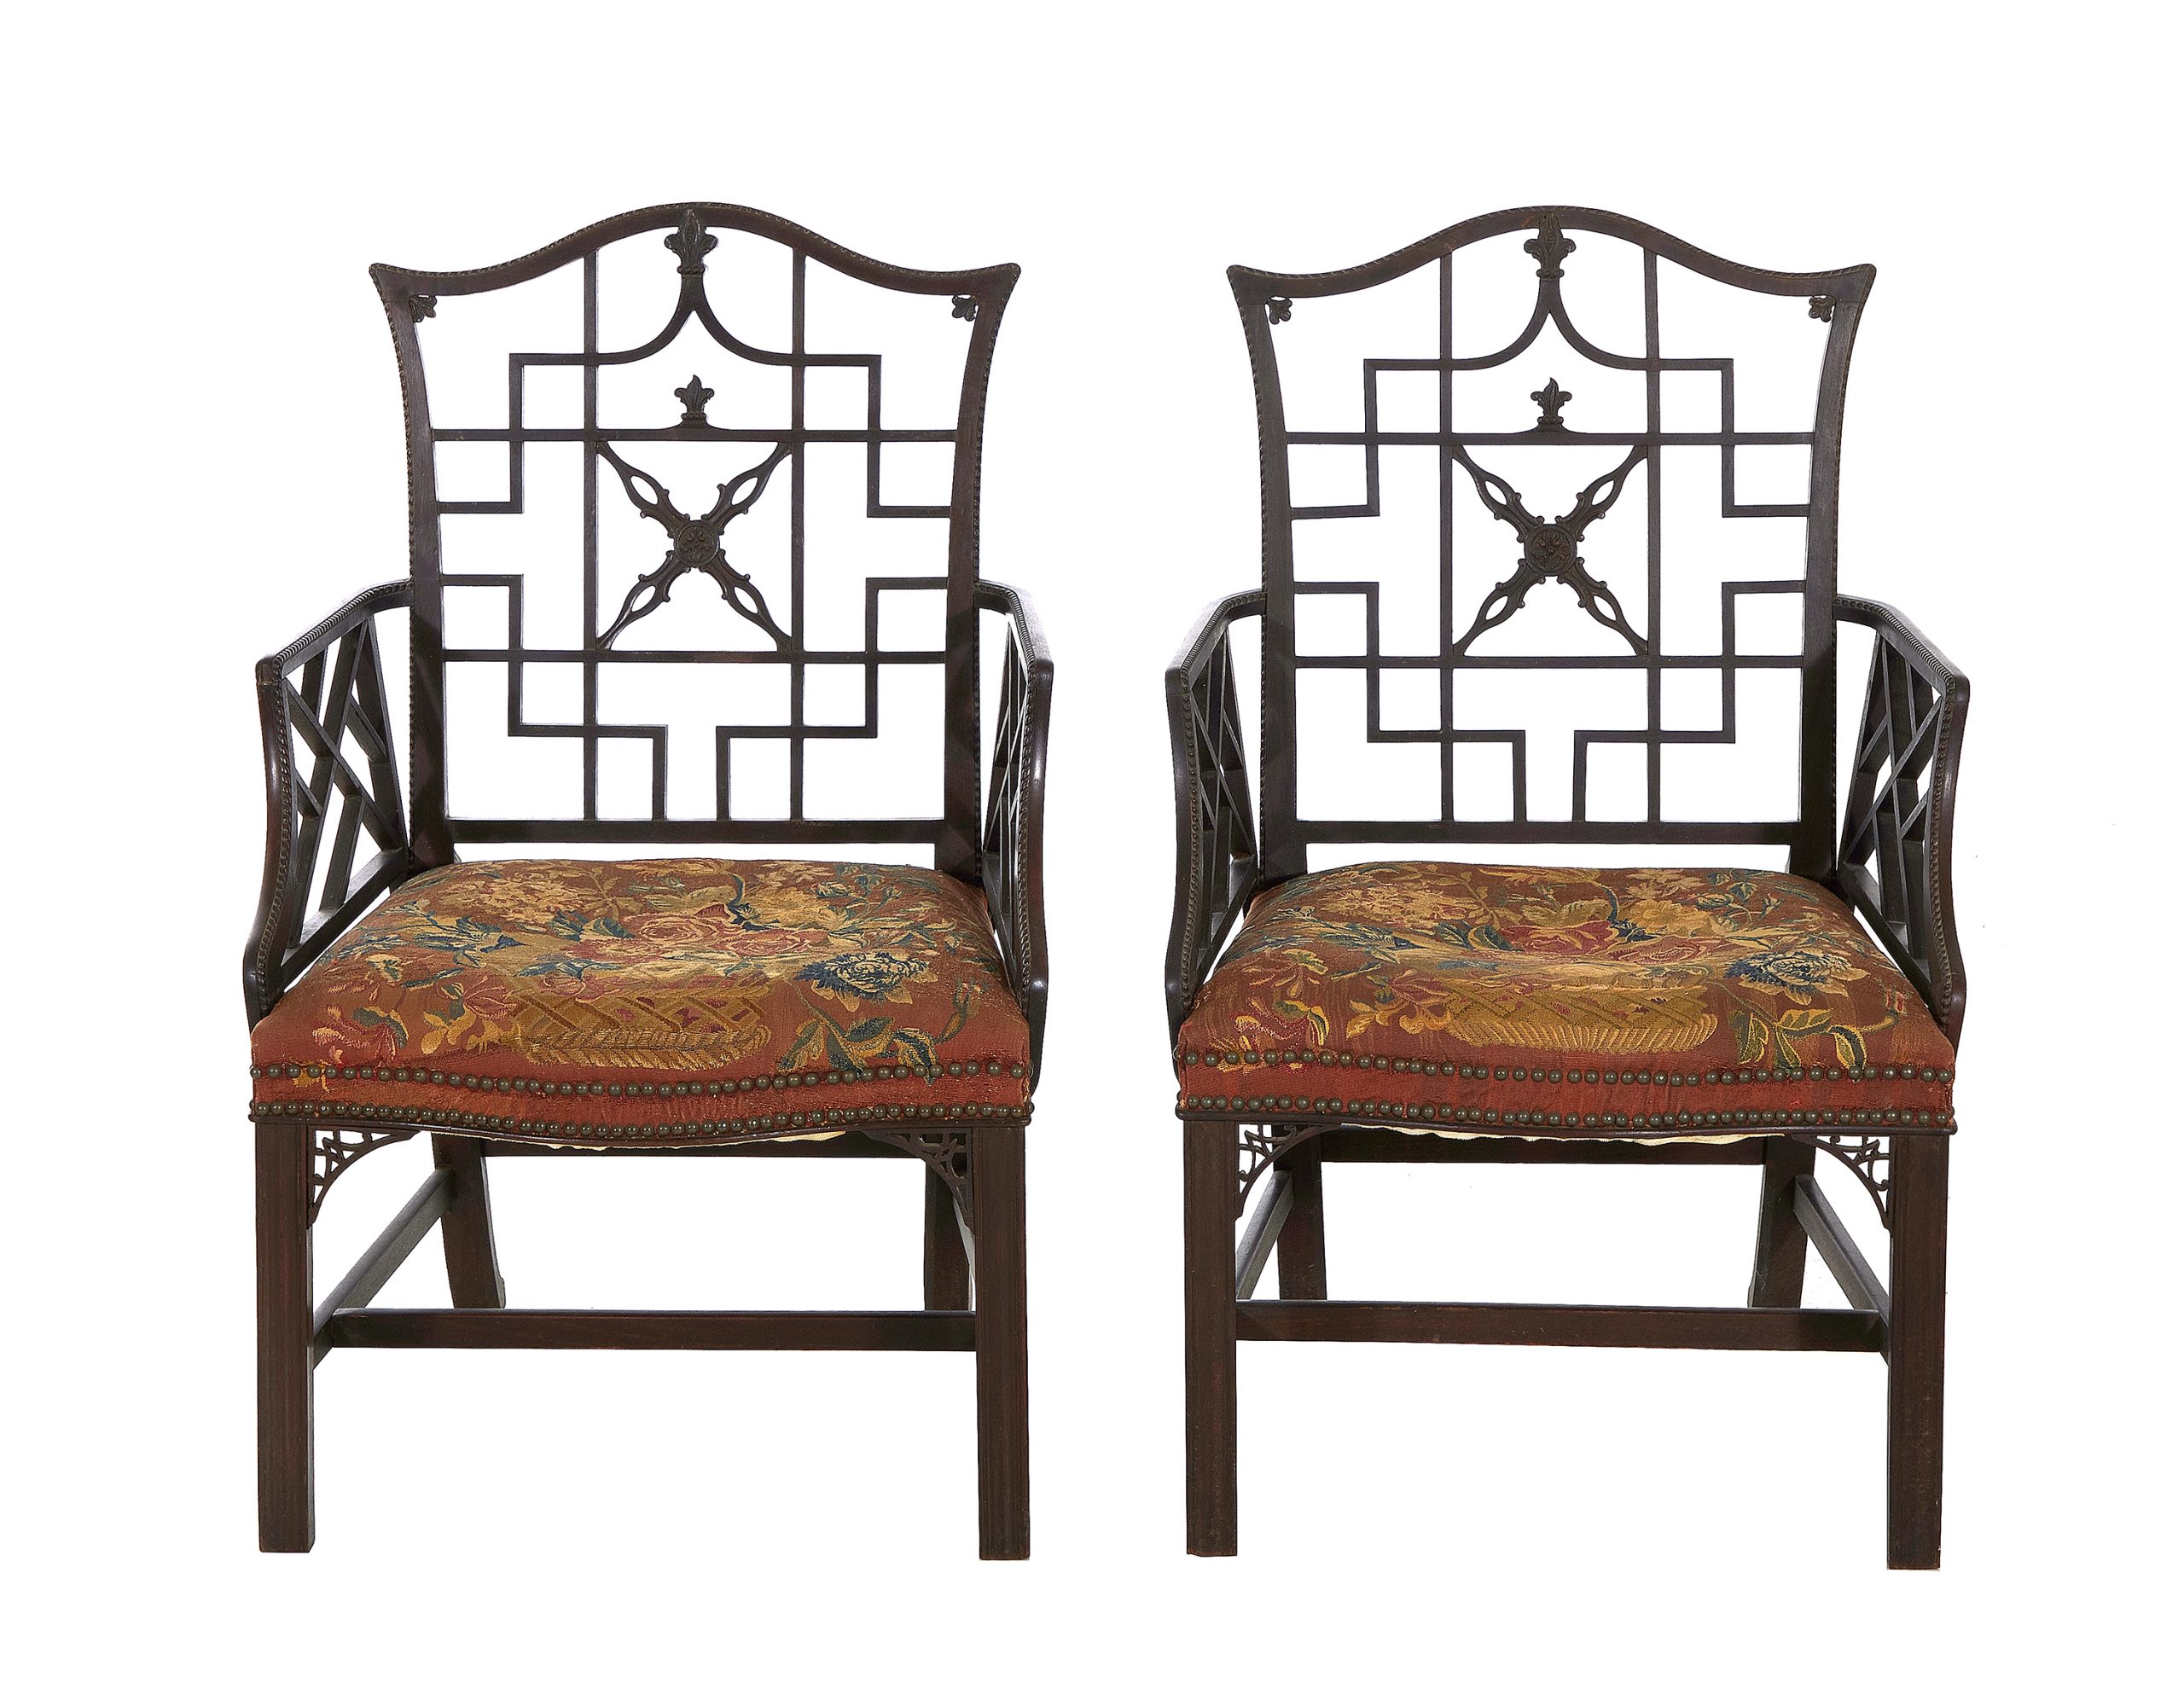 A pair of George II carved mahogany armchairs covered in Soho tapestry, circa 1755. Sold for $125,000 to a South Carolina collector.